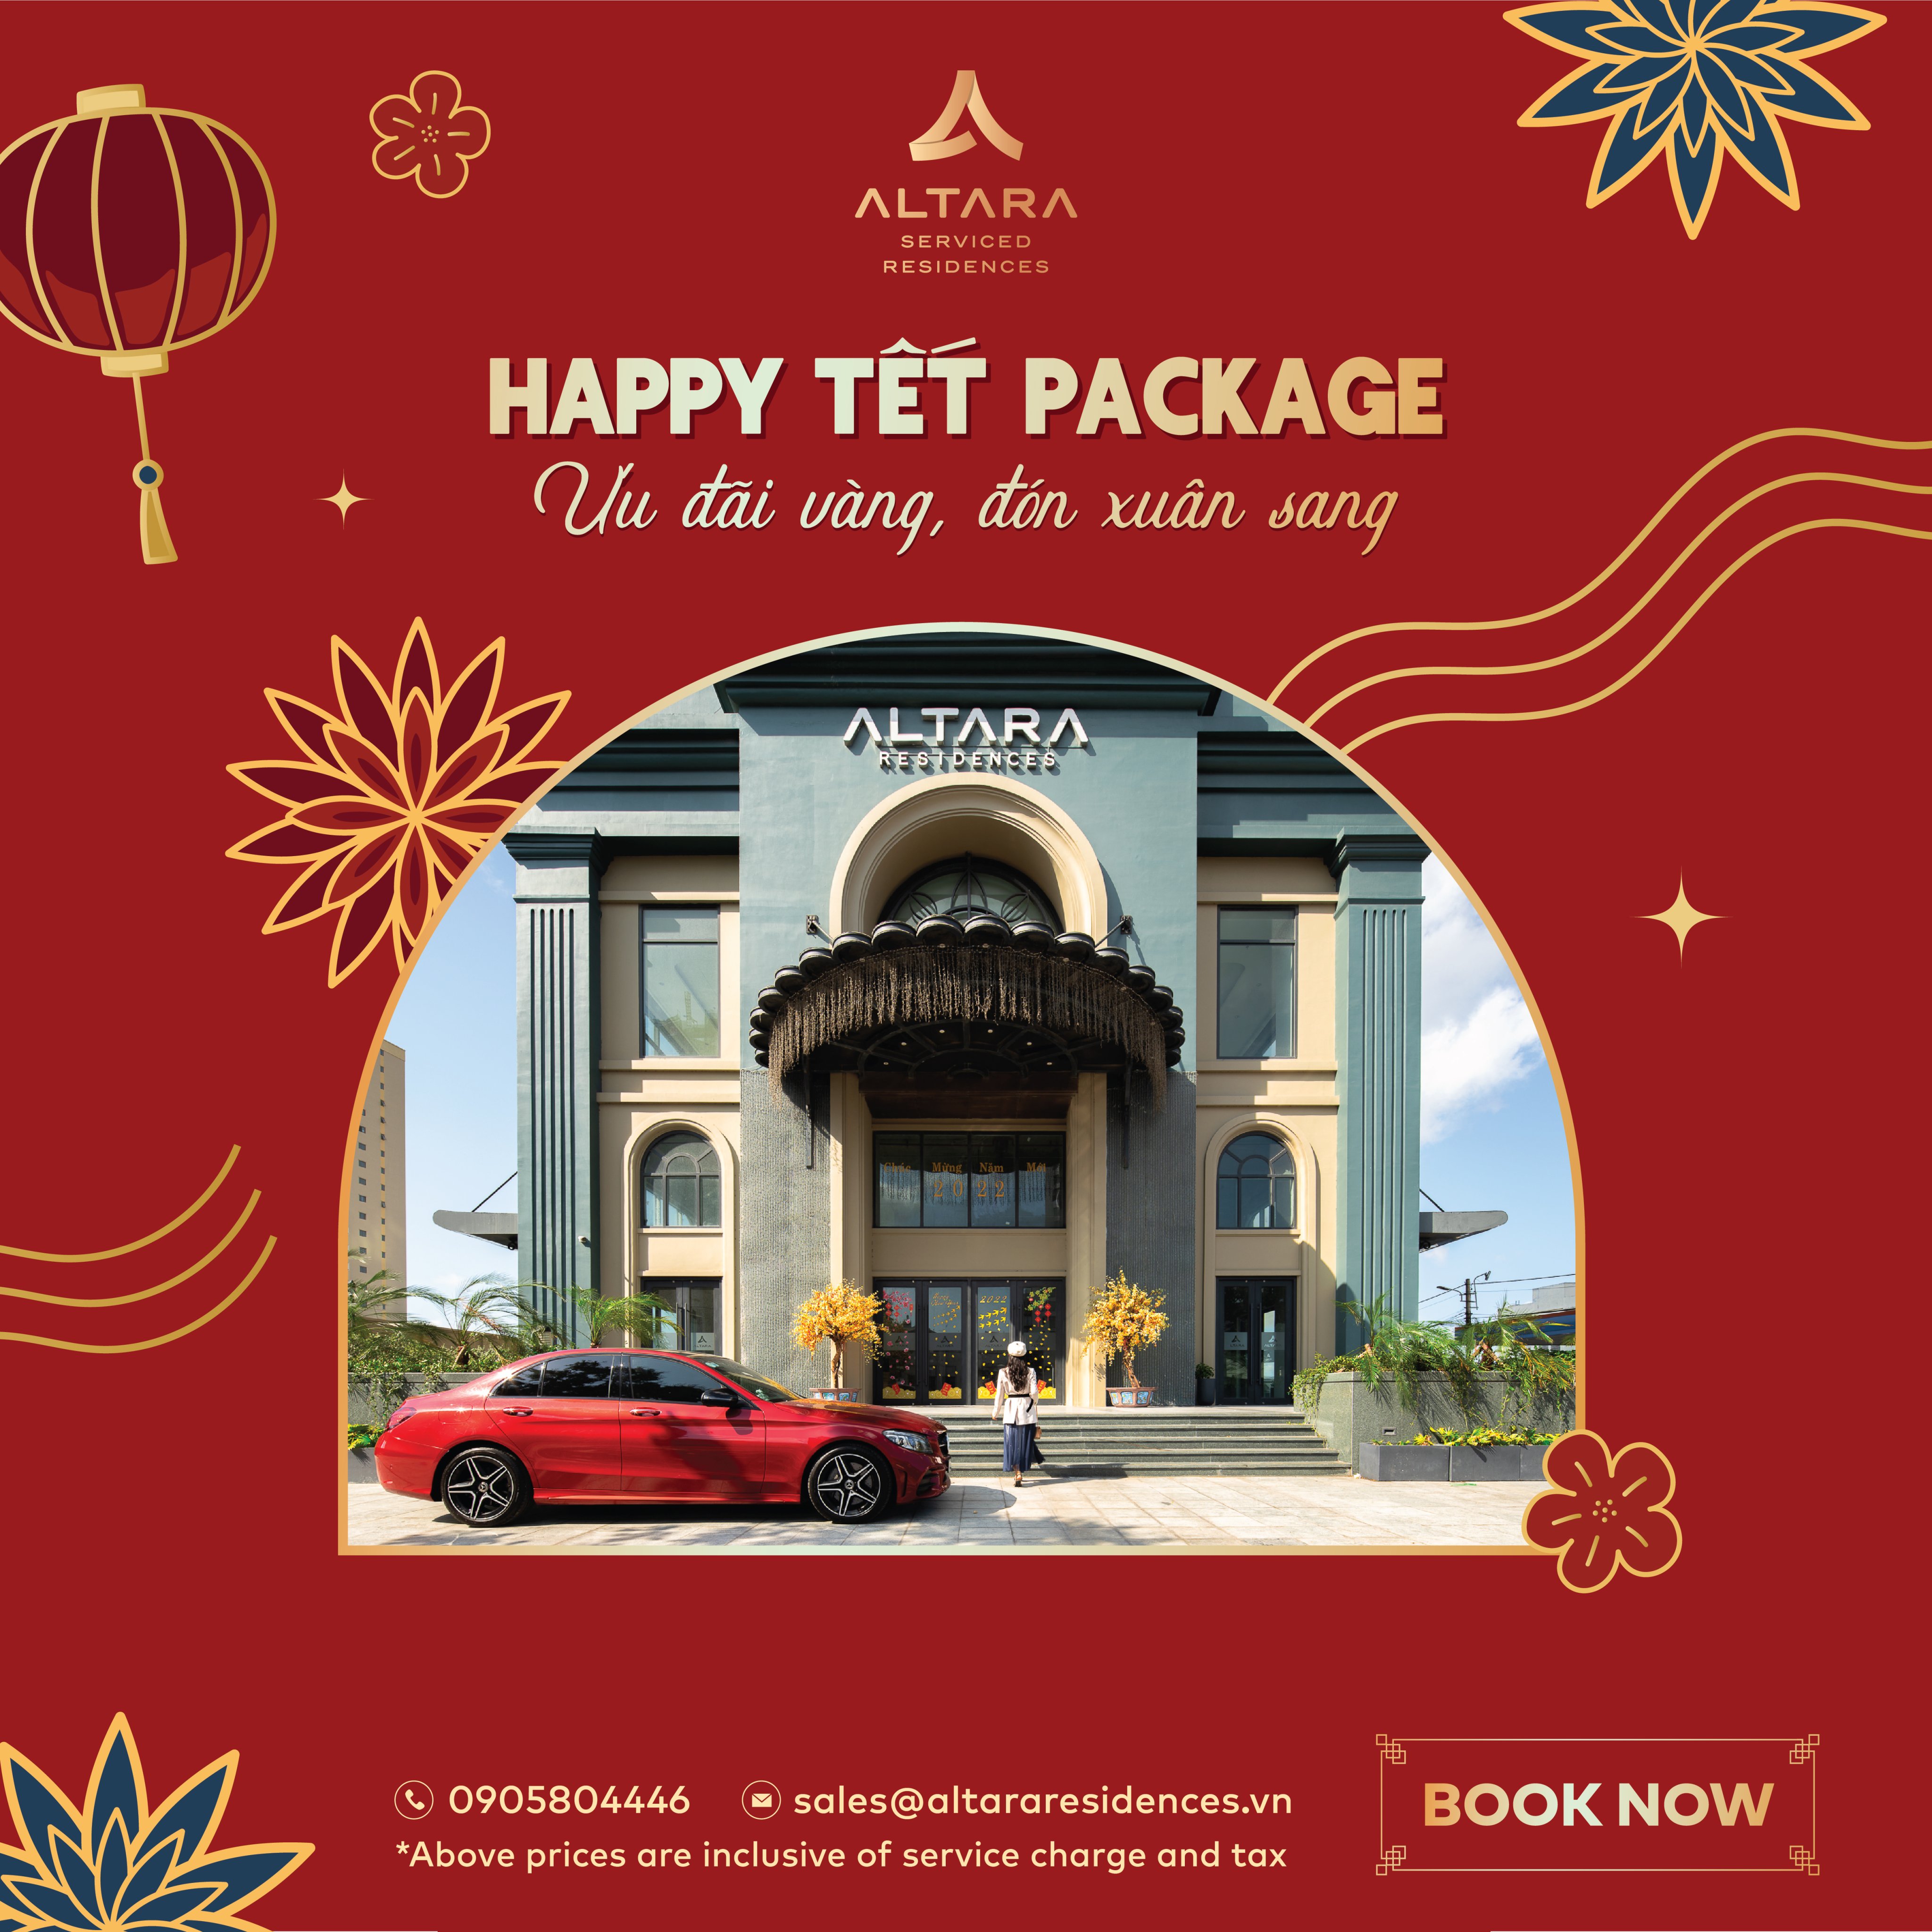 Make this TET unforgettable with Altara's Happy Tet Package